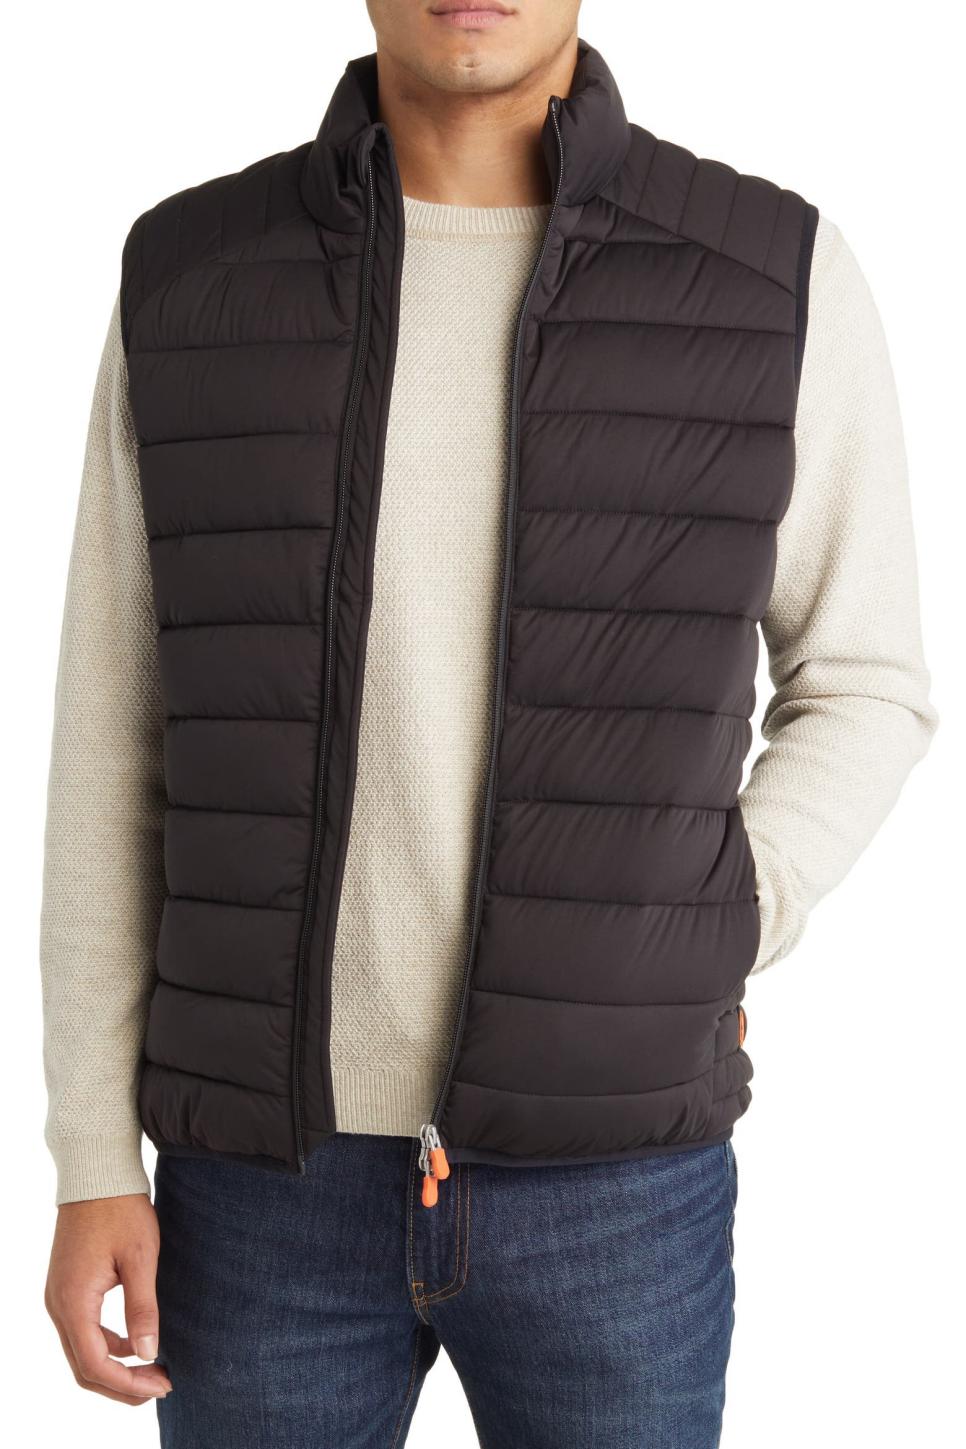 Save the Duck Russel Stretch Quilt Vest